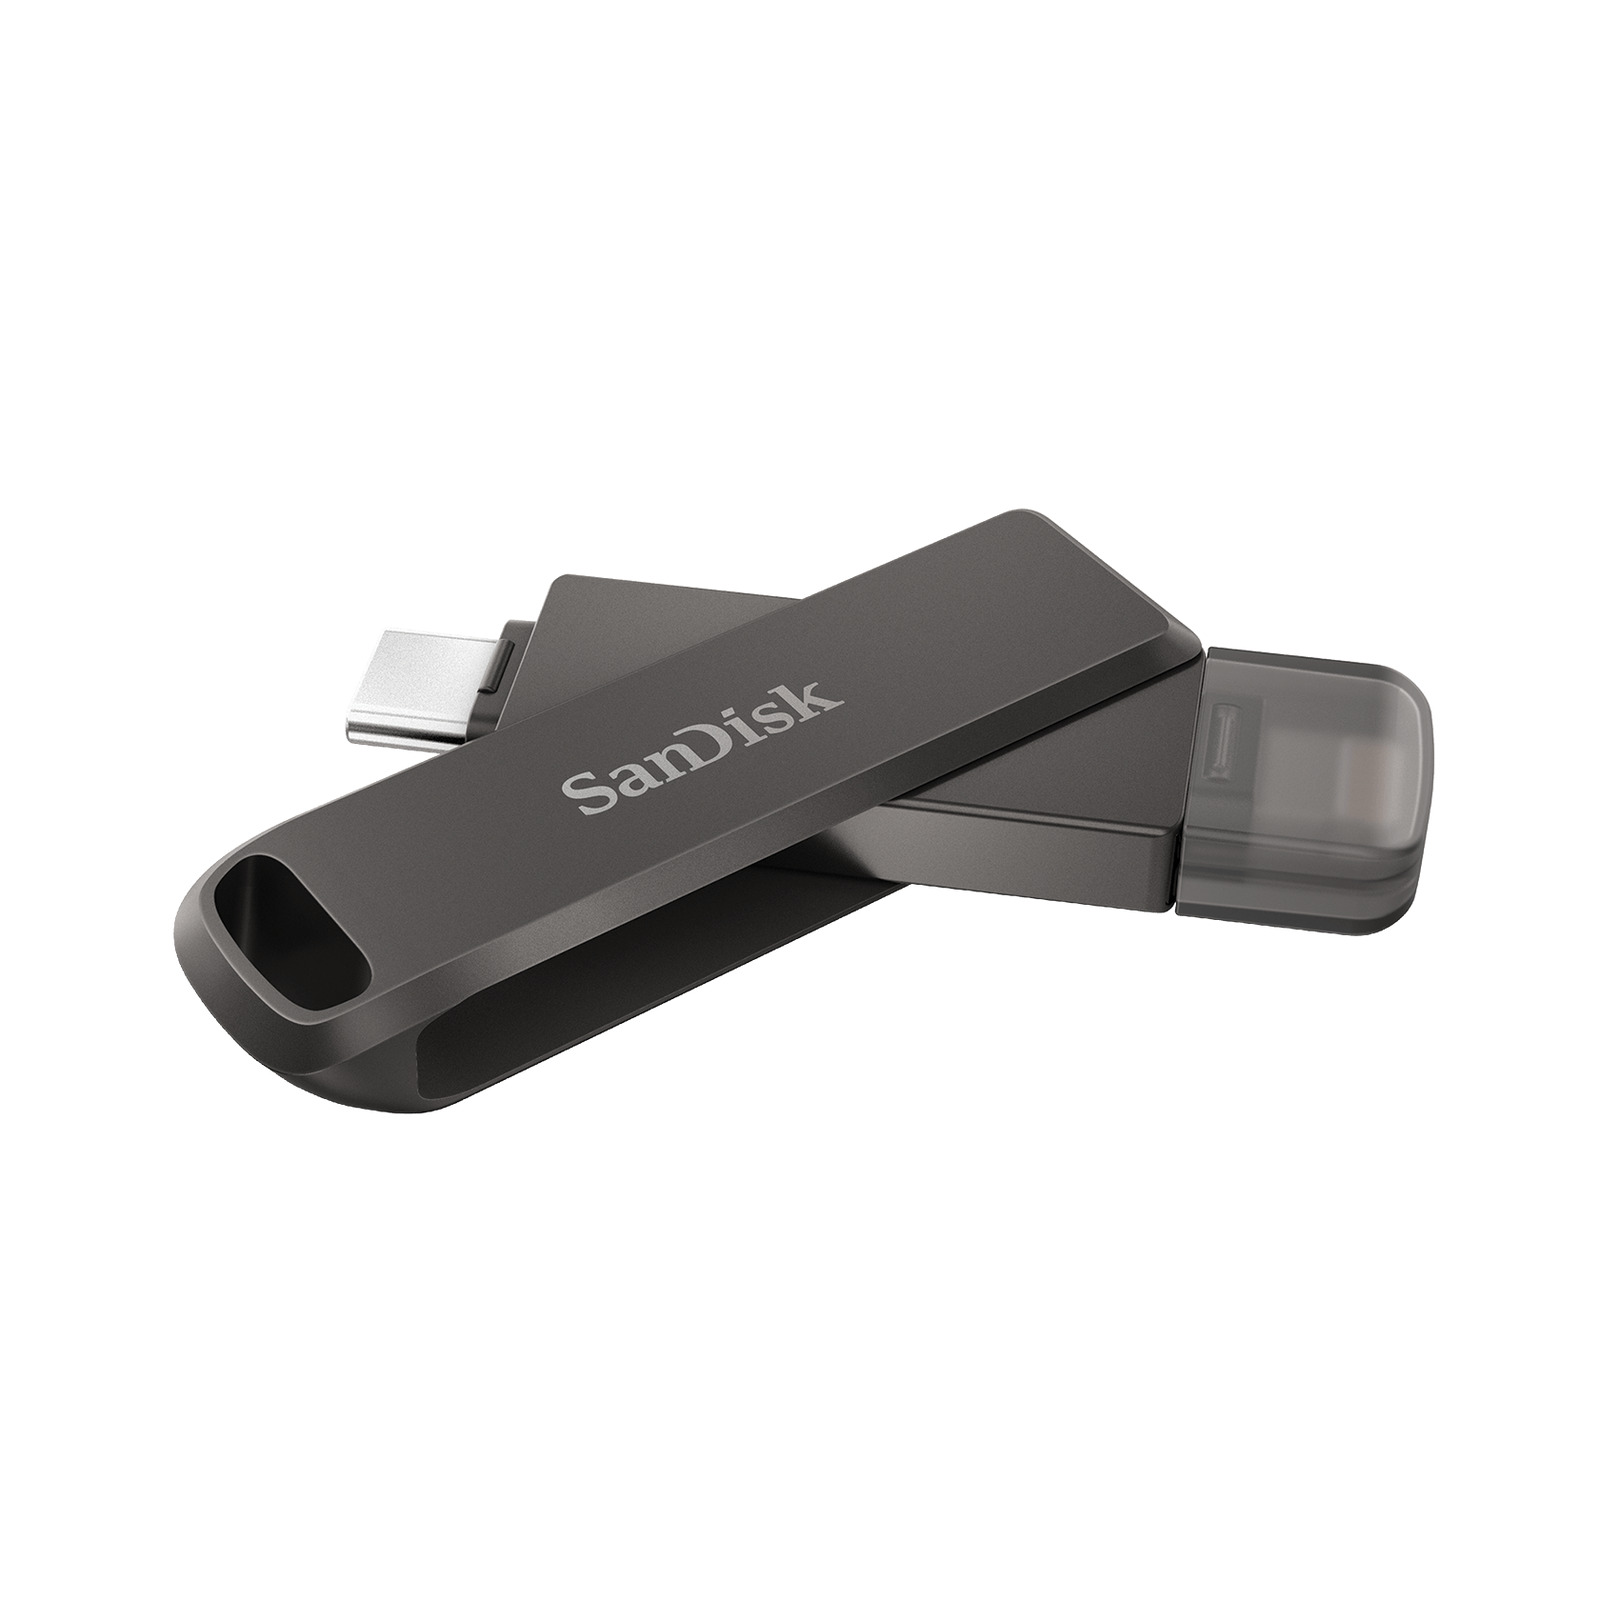 SanDisk 64GB iXpand Flash Drive Luxe, USB Type-C Devices - SDIX70N-064G-AN6NN